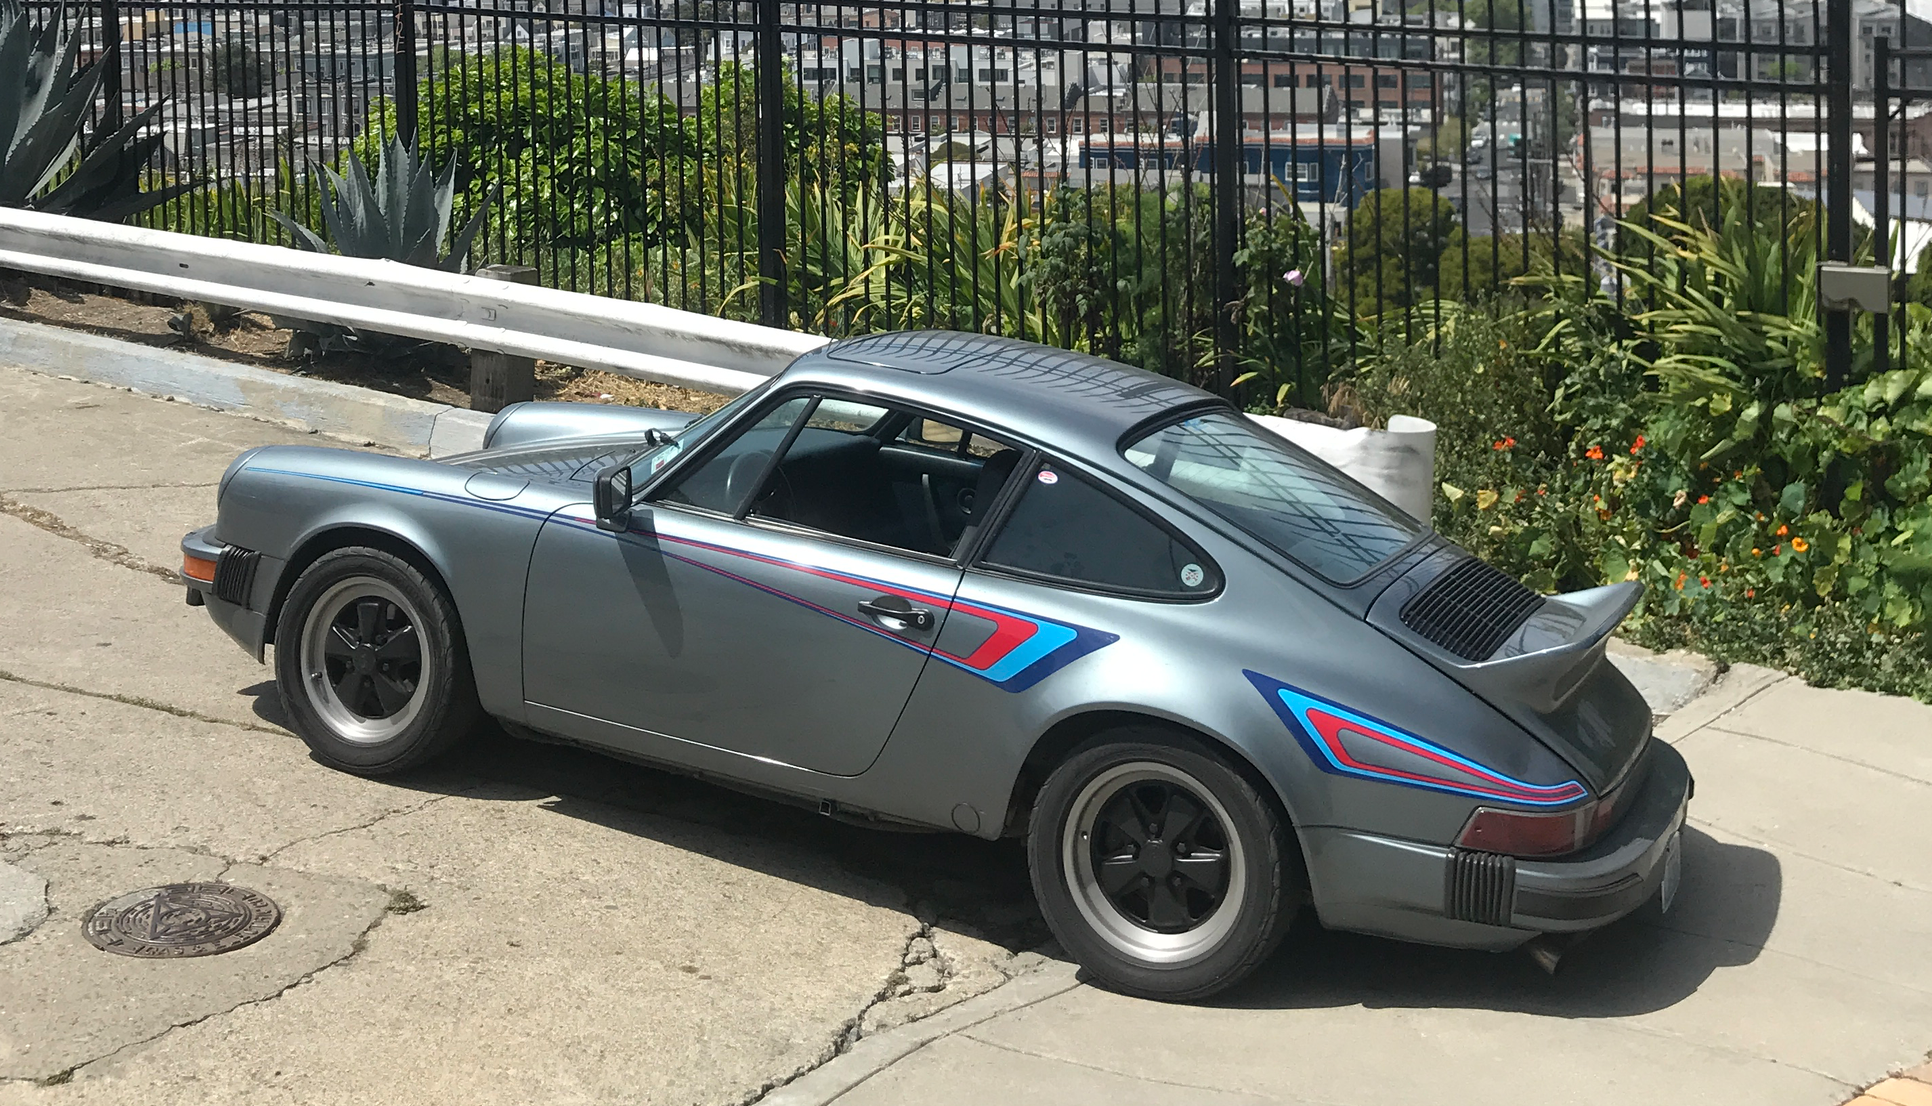 1983 Porsche 911 - 1983 911 SC Slate Blue w Martini Stripes - Used - VIN WP0AA0916DS121820 - 186,000 Miles - 6 cyl - 2WD - Manual - San Francisco, CA 94103, United States